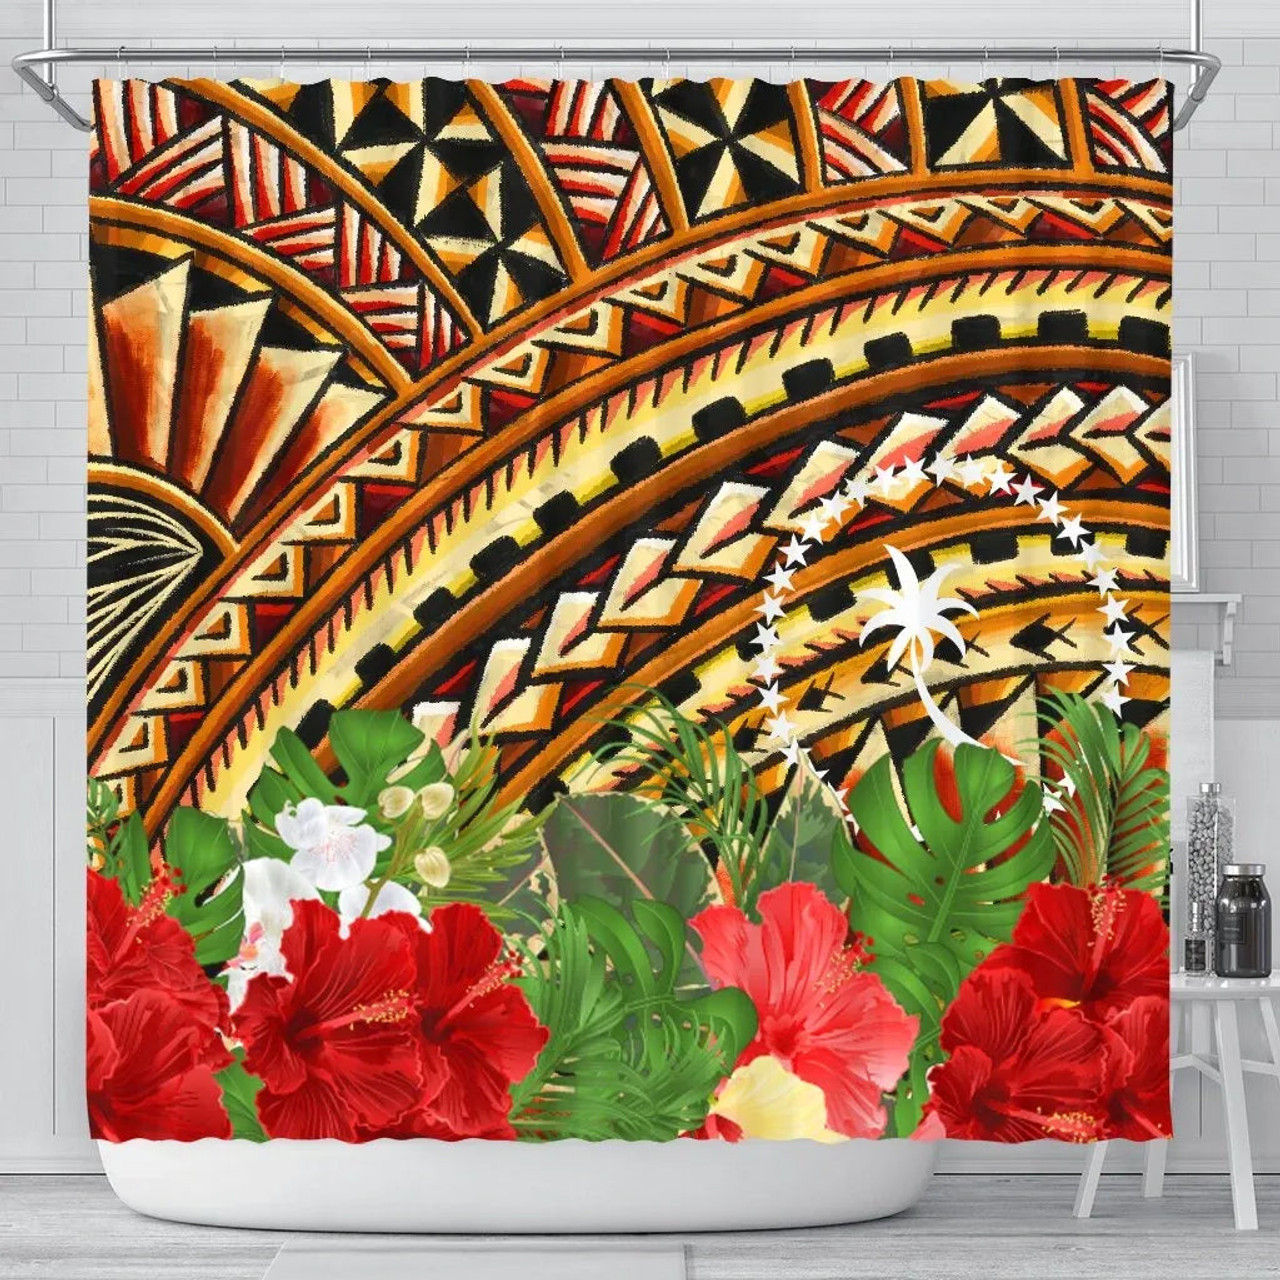 Chuuk Shower Curtain - Vintage Pattern With Hibiscus Flower 1